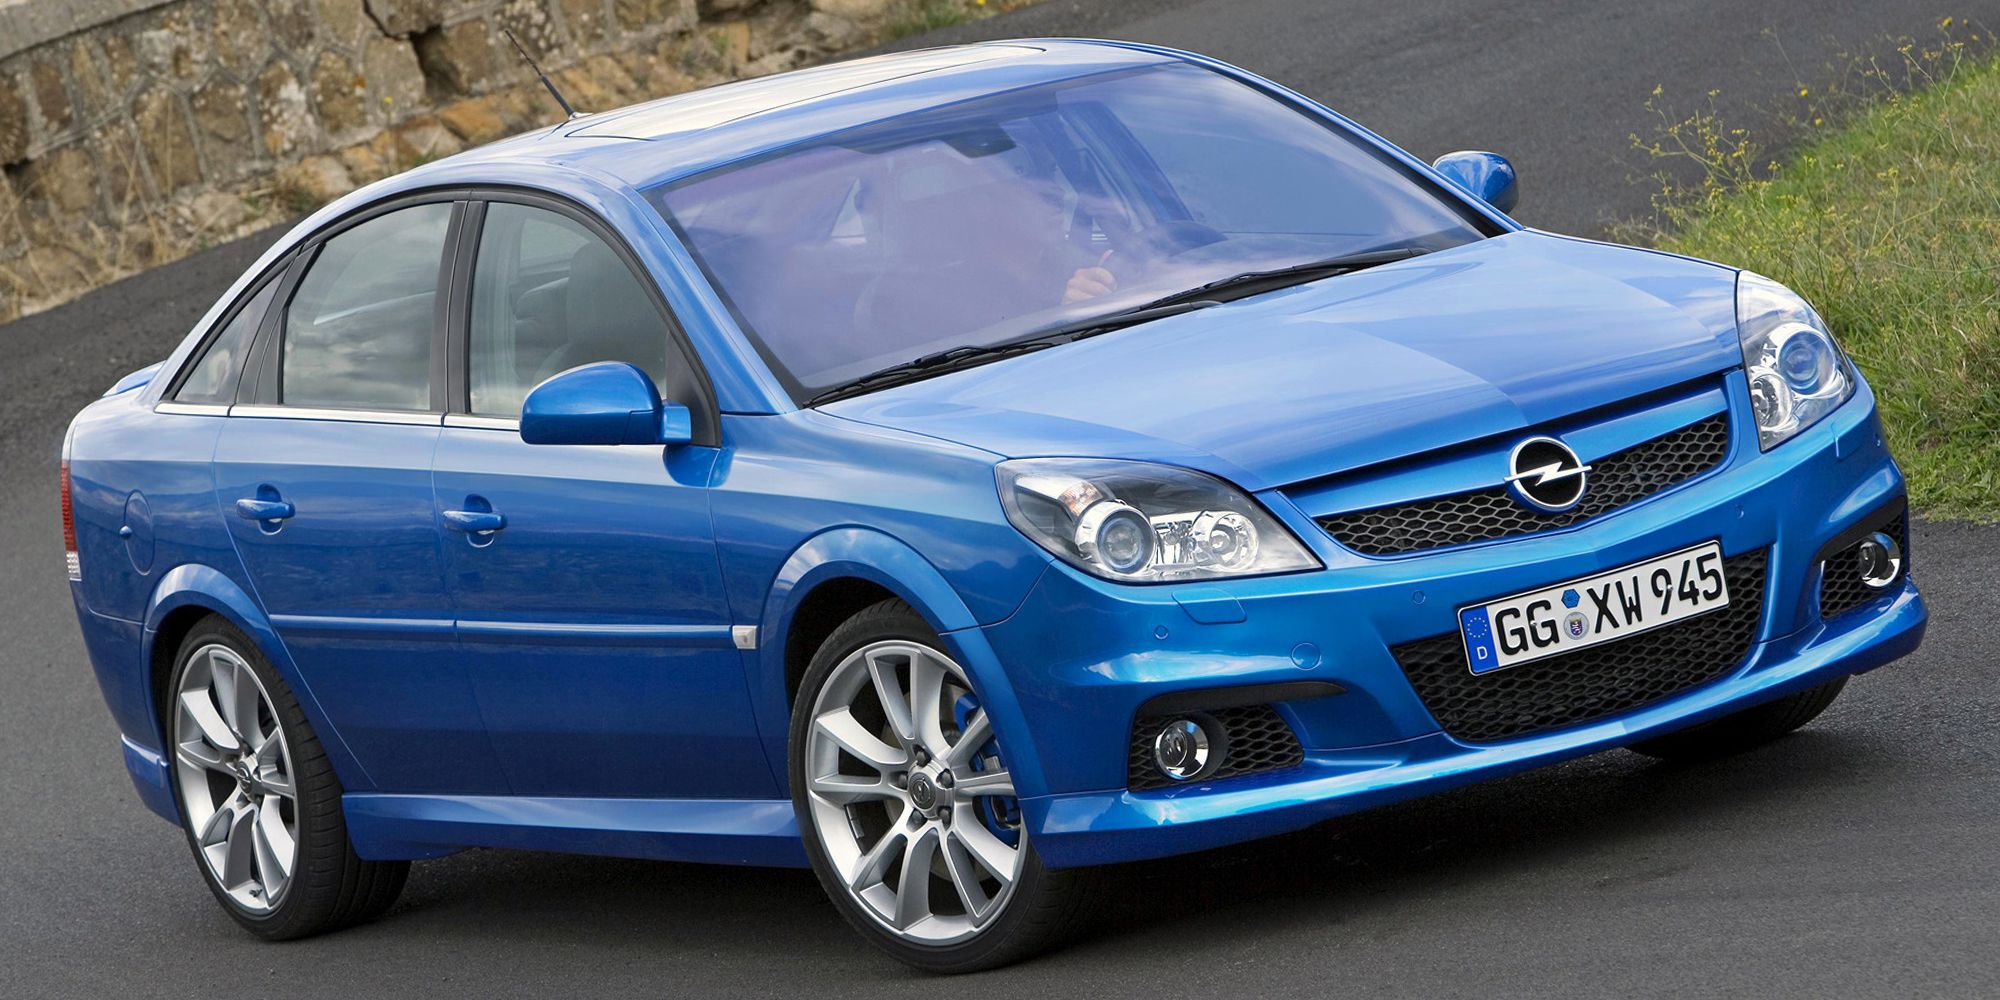 The front of the Vectra OPC